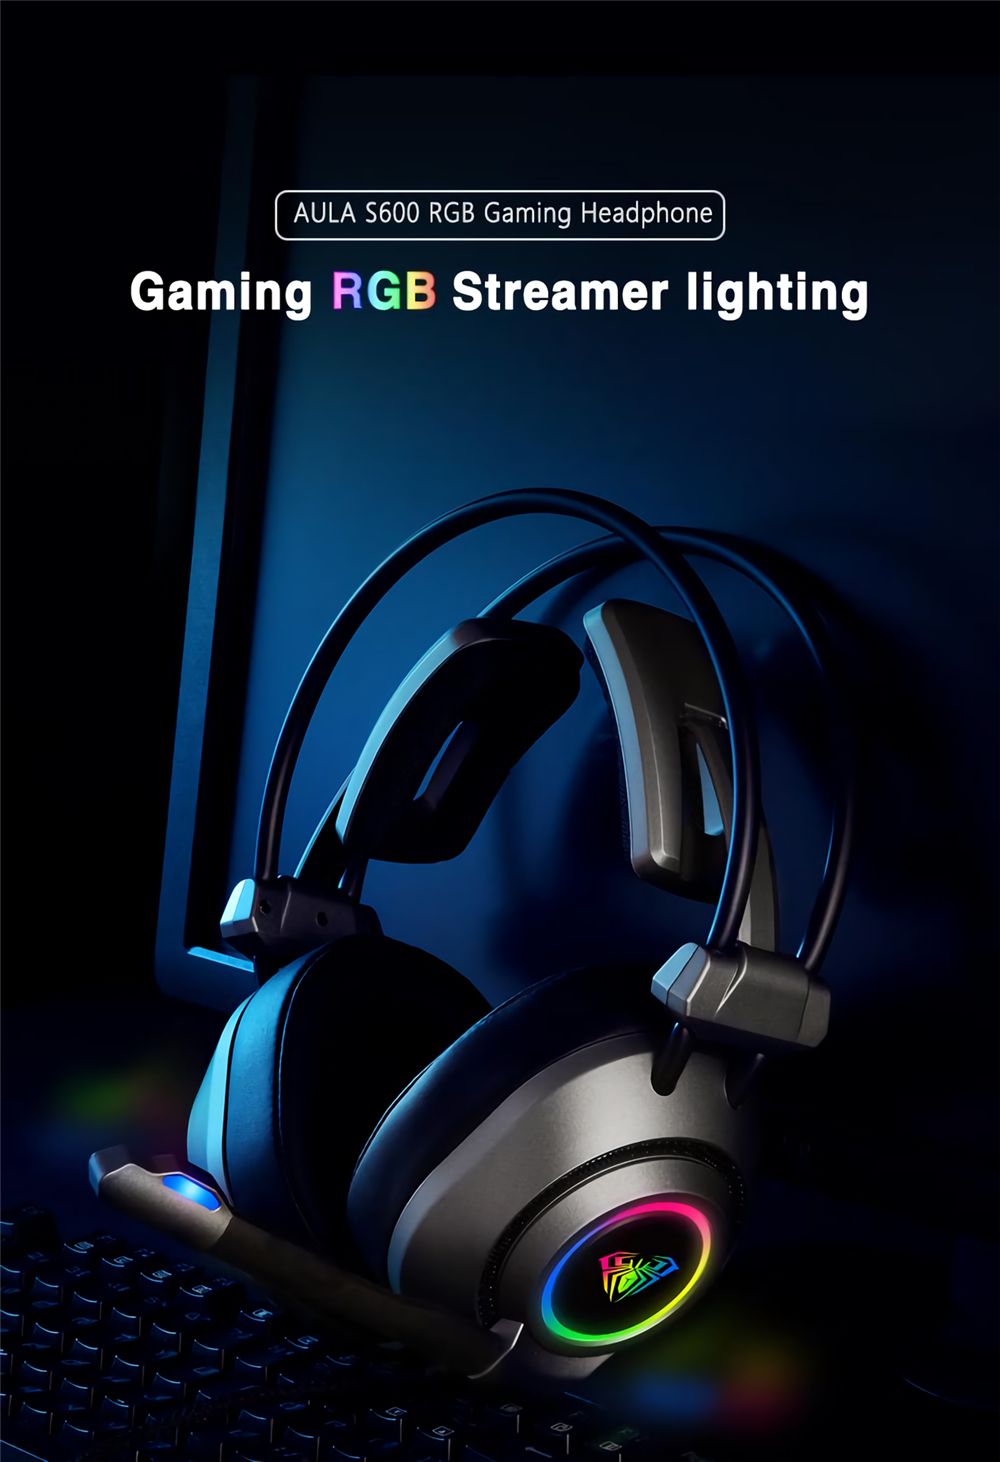 AULA-S600-Game-Headset-71-Channel-USB-35mm-Wired-RGB-Gaming-Headphone-Stereo-Sound-Headset-with-Mic--1717346